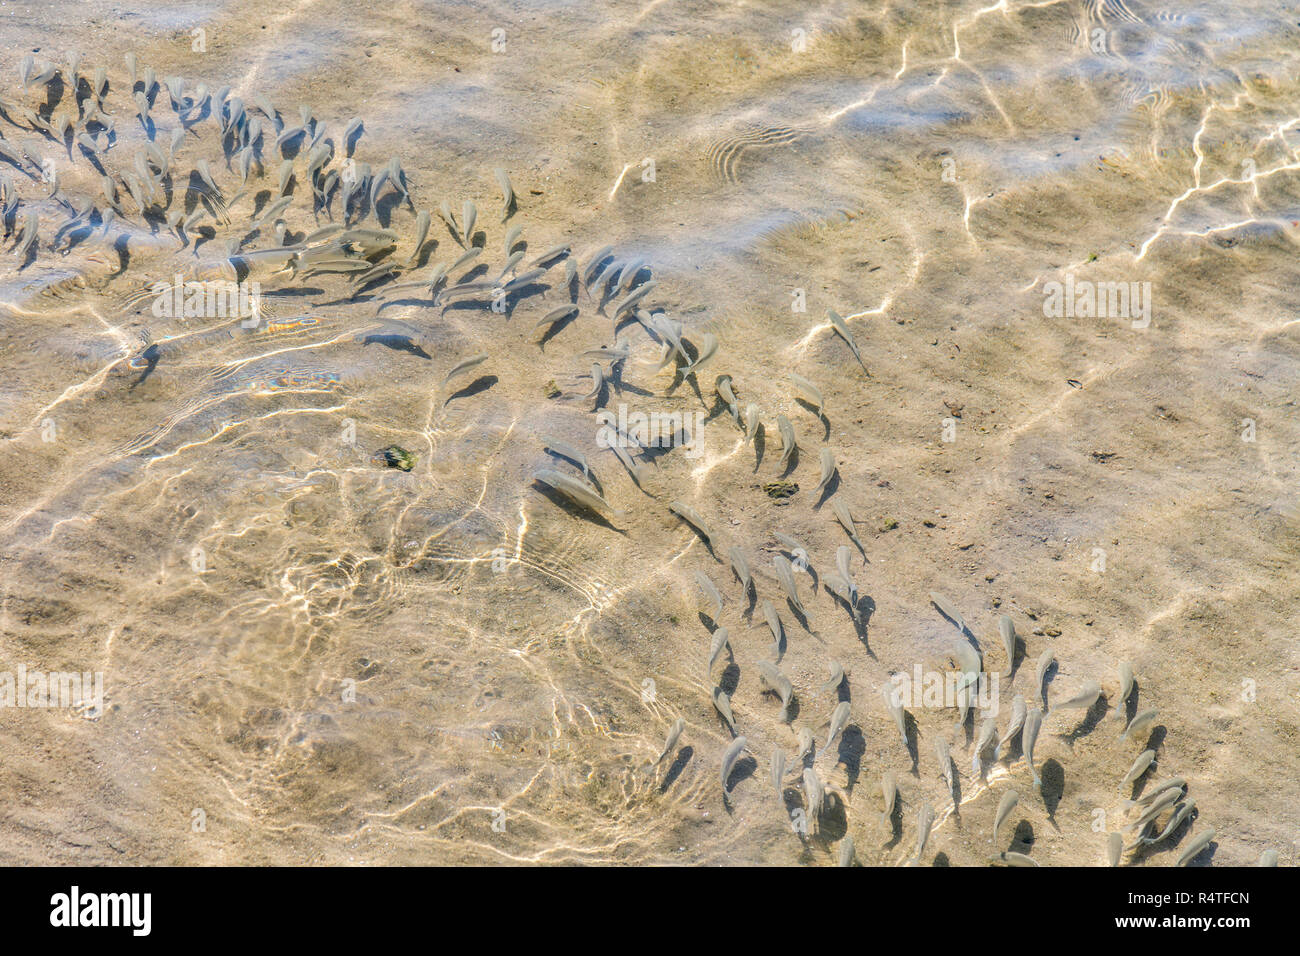 shoal of fish in shallow water. Flock of fish fry in shallow water. Nature background. The shadows of minnows swimming in shallow water with waves. So Stock Photo